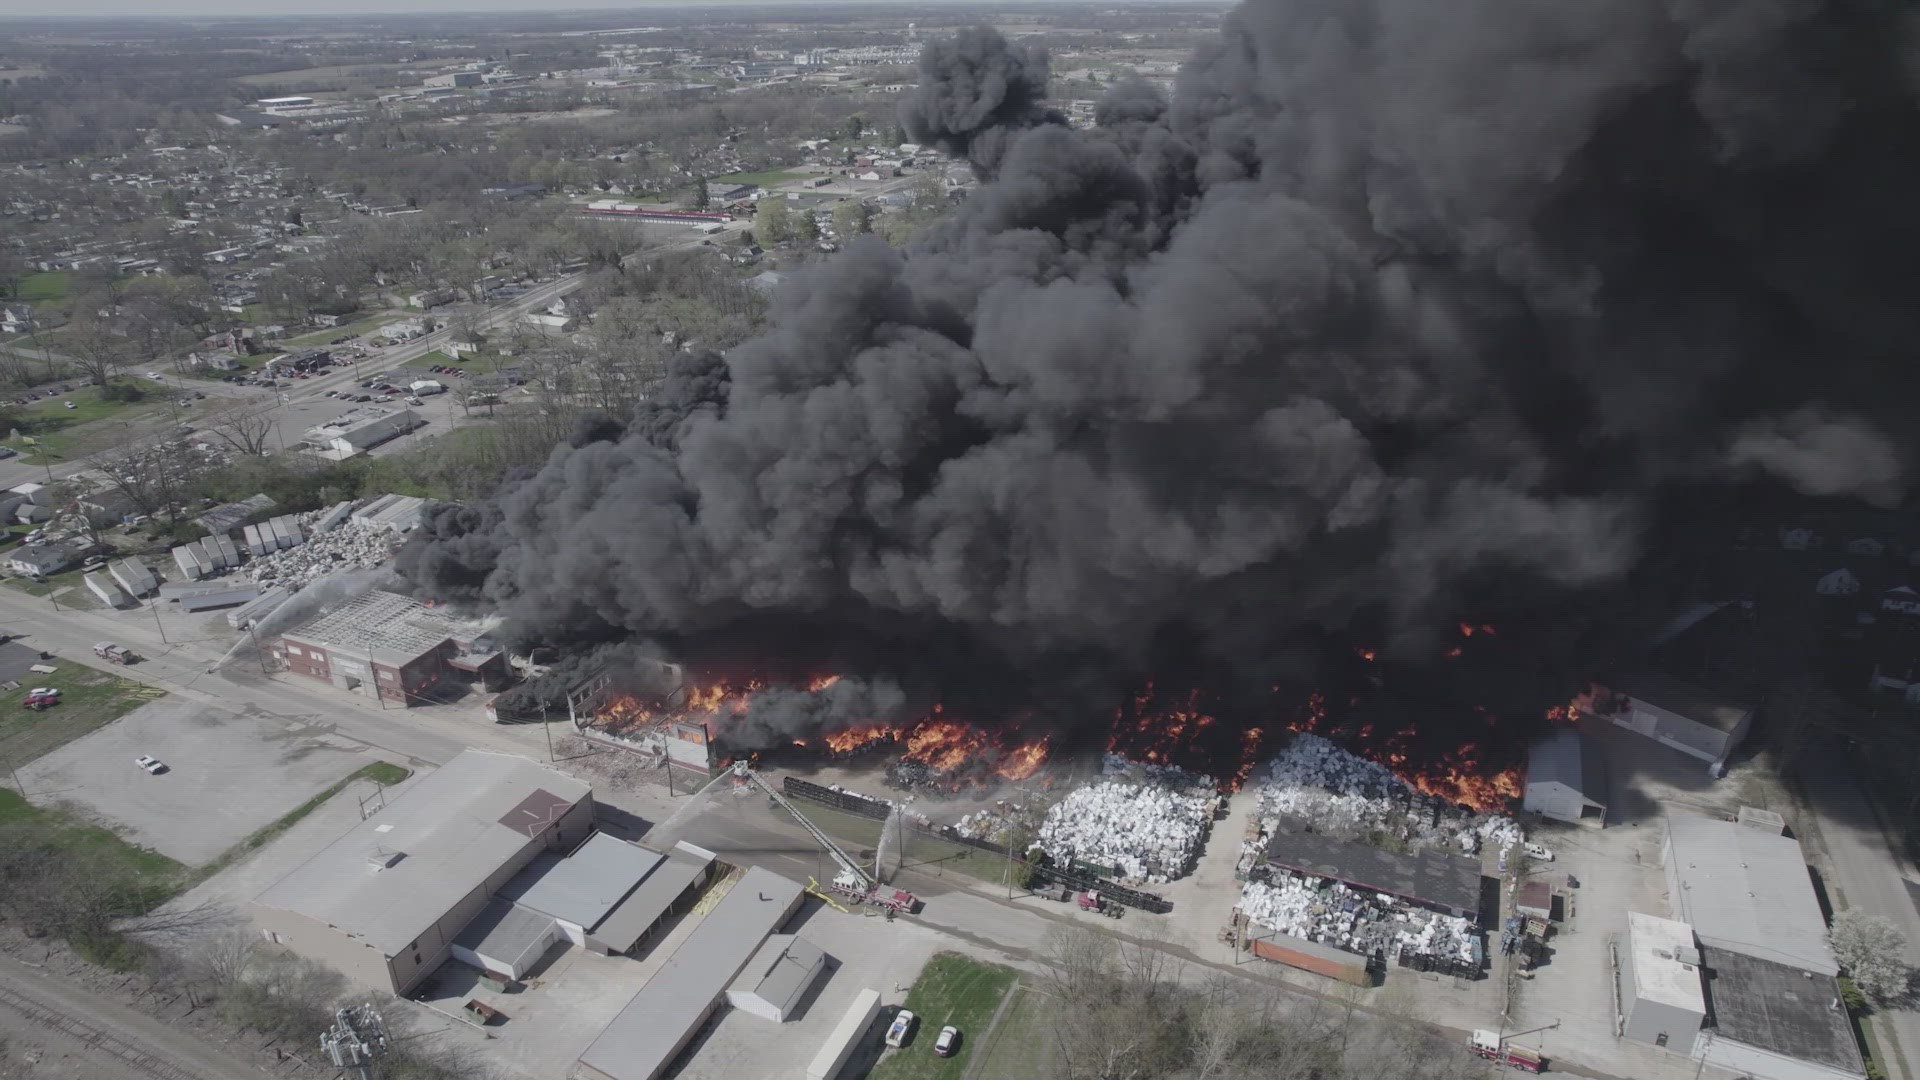 Several departments are battling a large warehouse fire in Wayne County. Credit: Kevin Shook